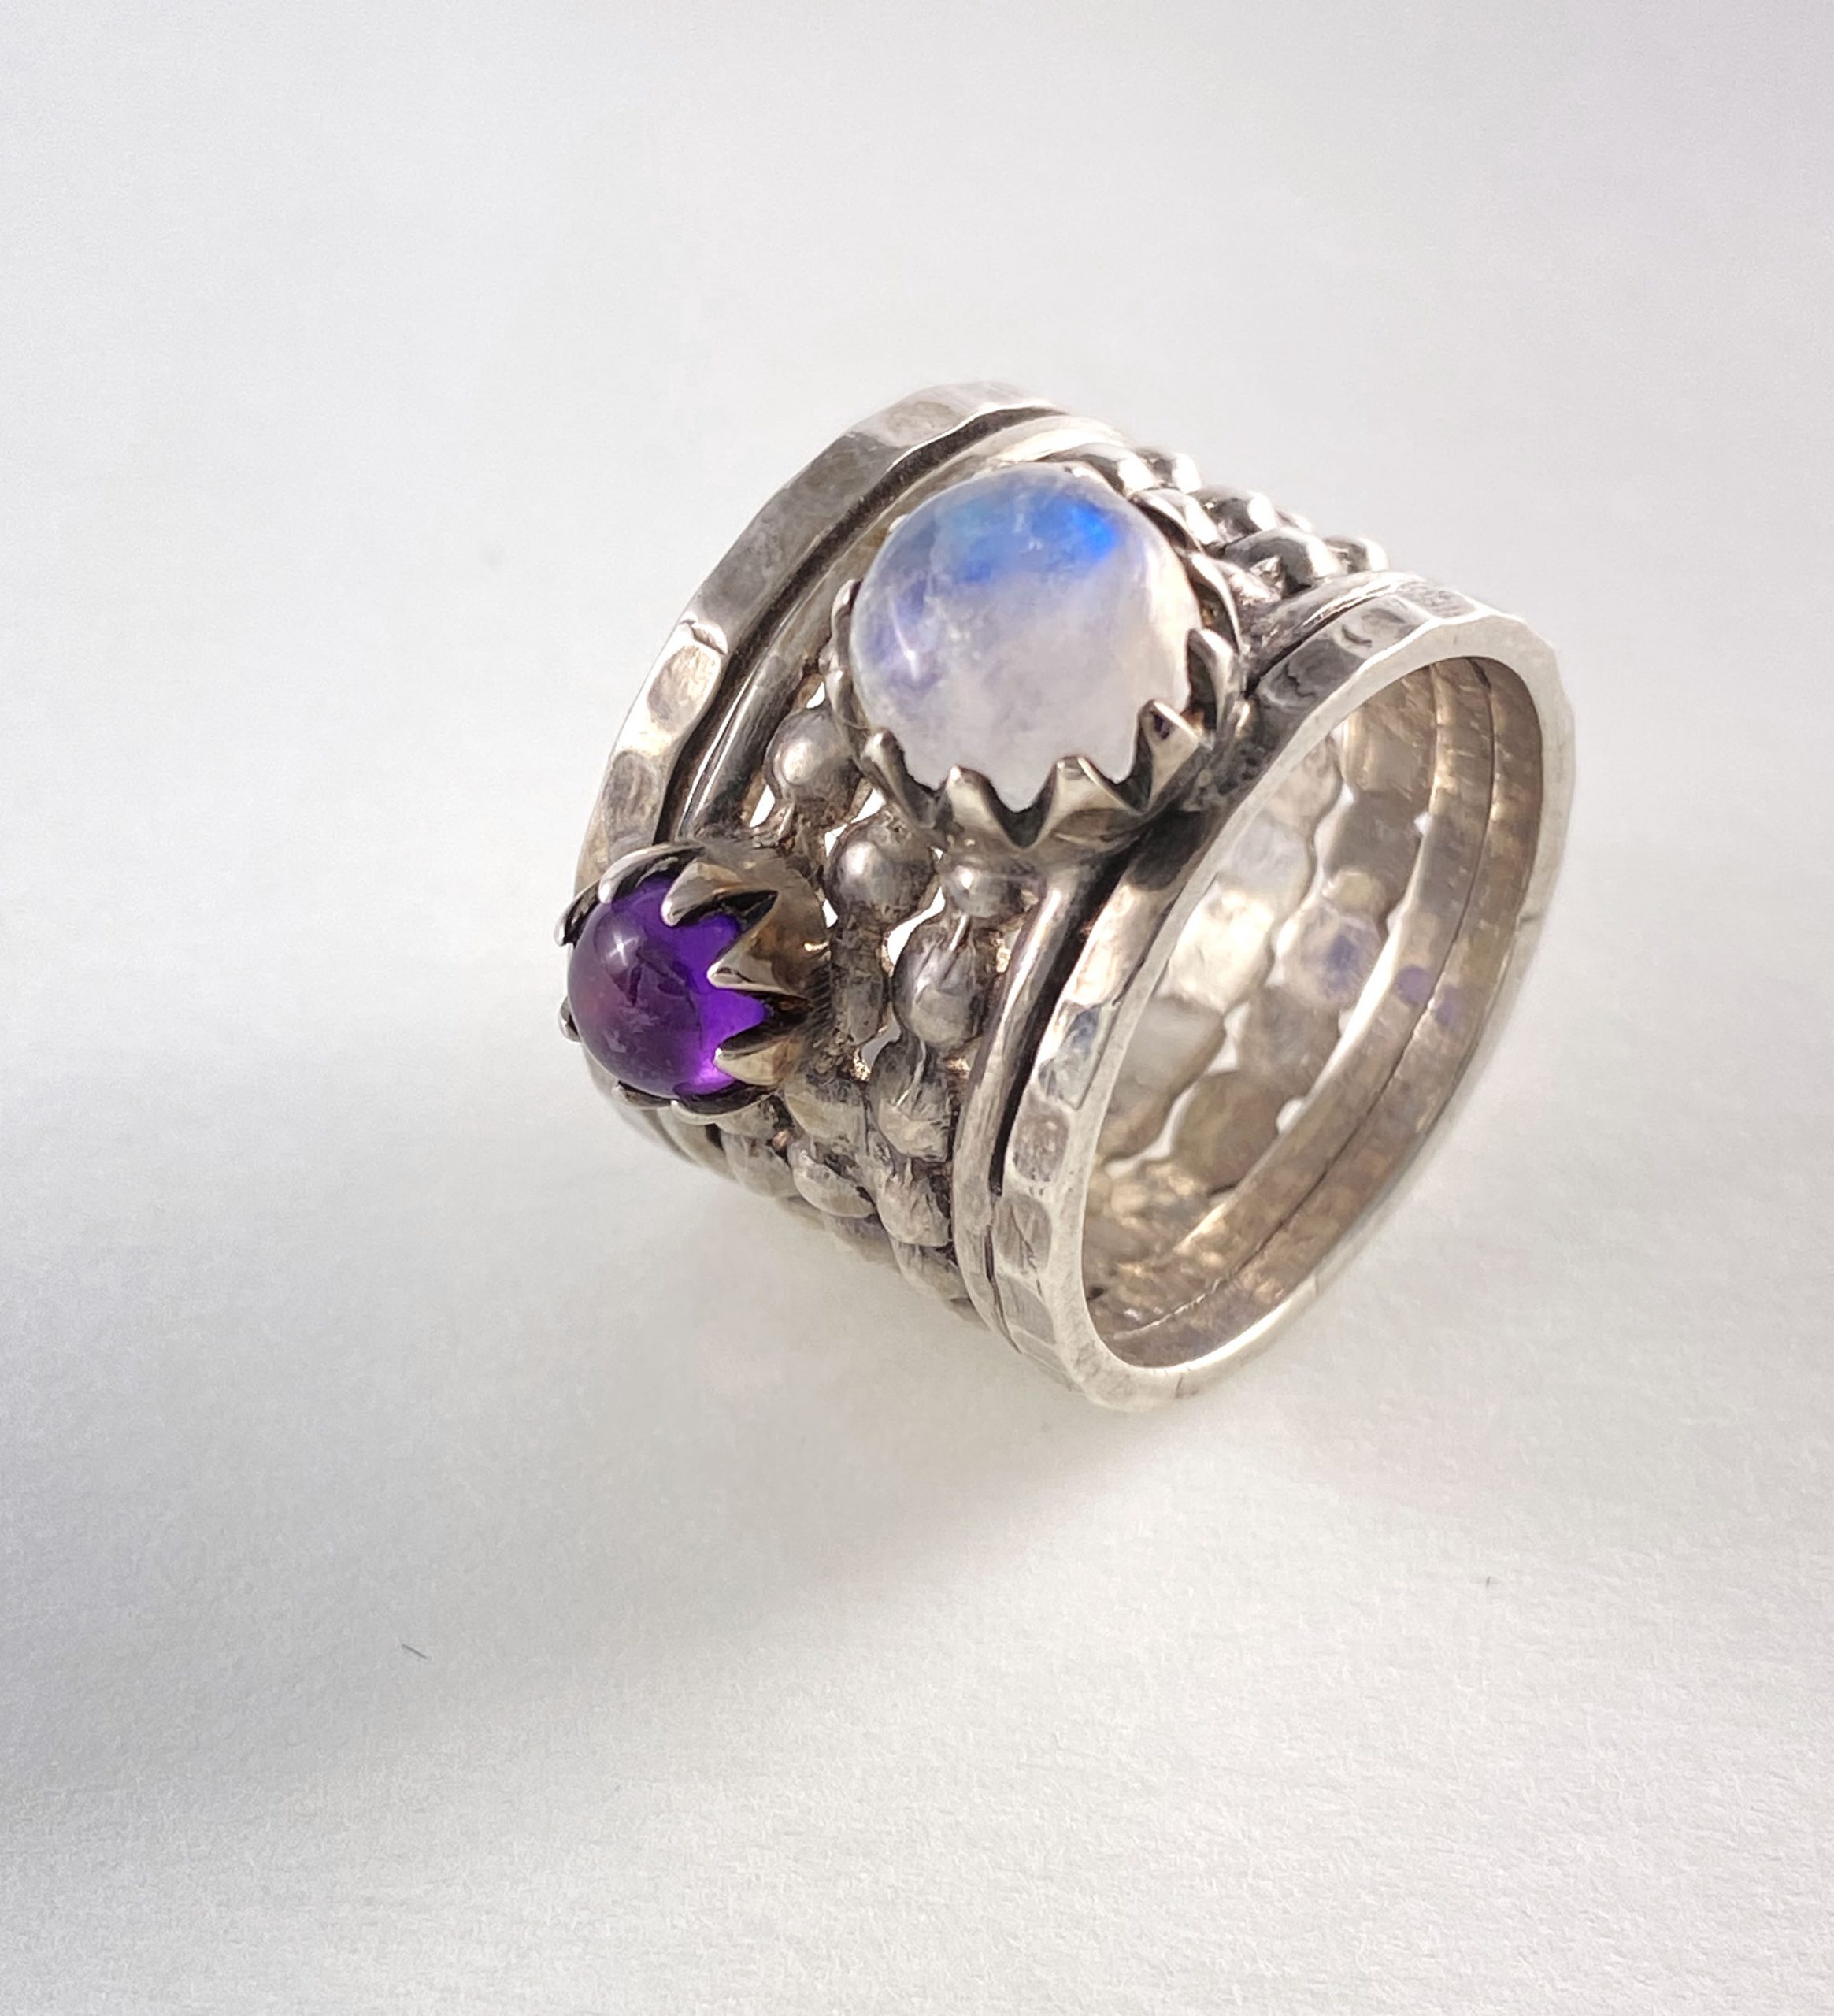 Moonstone and ameythist stone ring